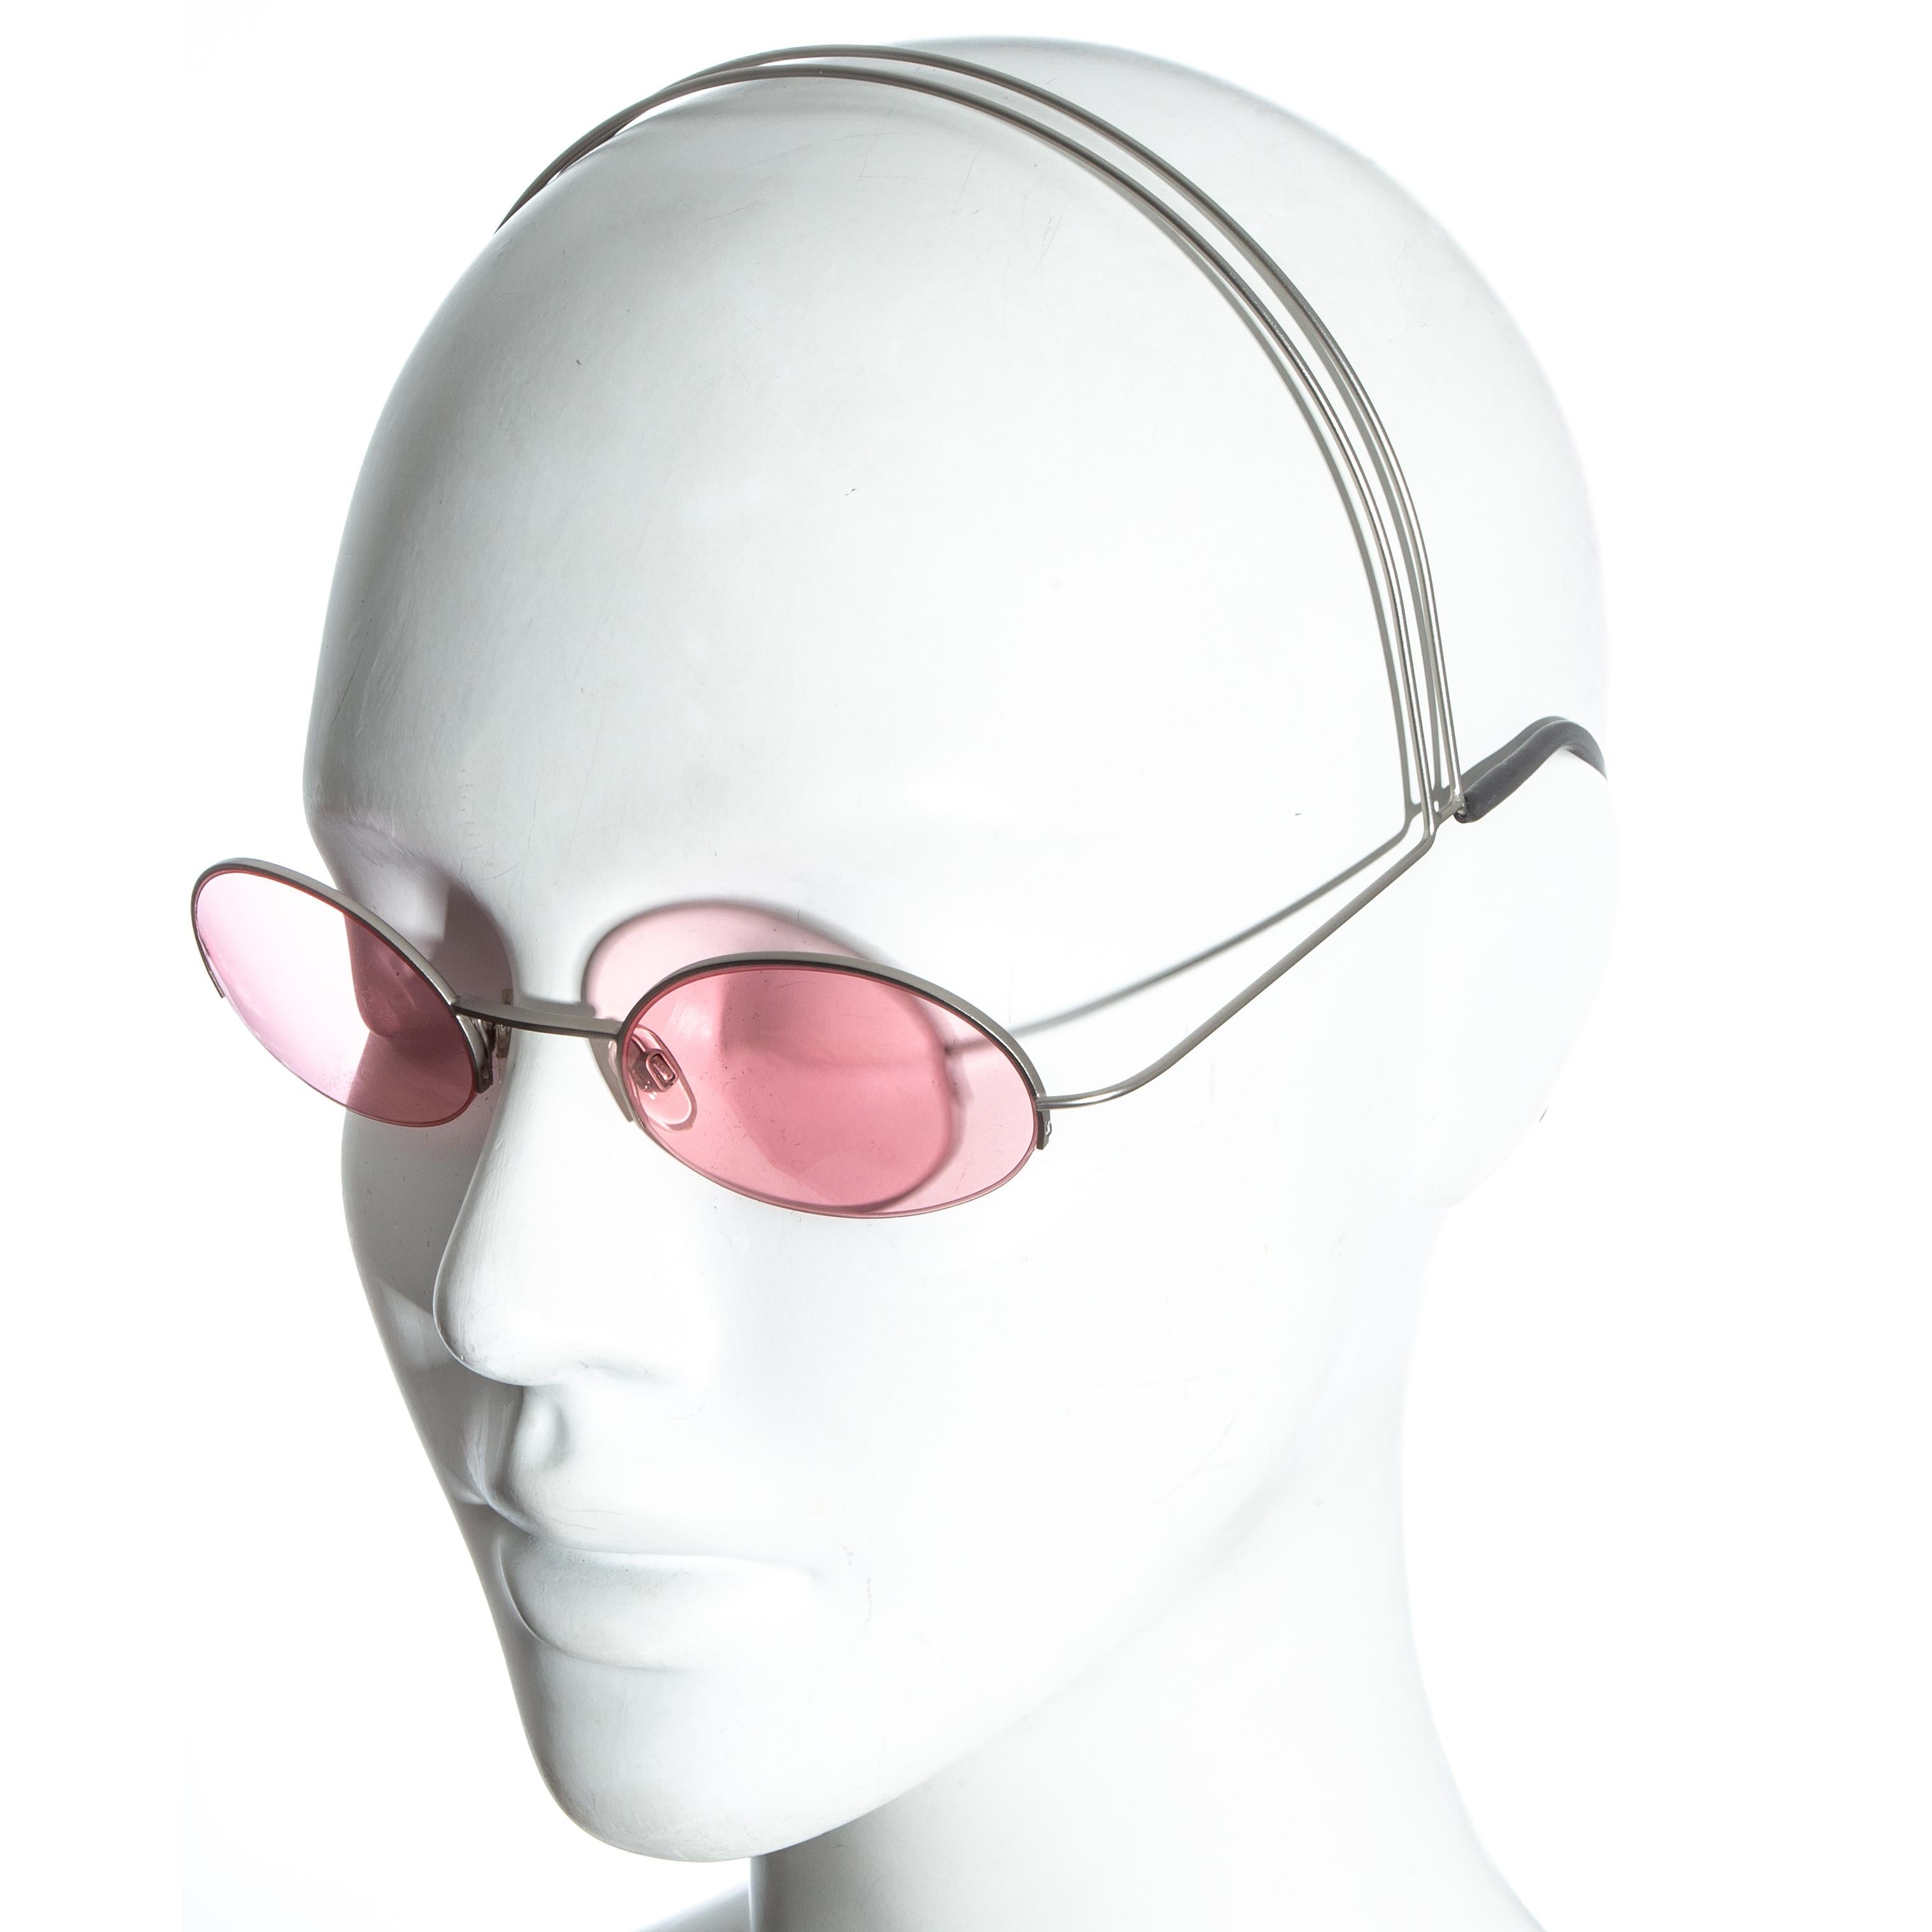 Chanel pink sunglasses with silver wire headband and black rubber grips with chanel logo

Spring-Summer 1999